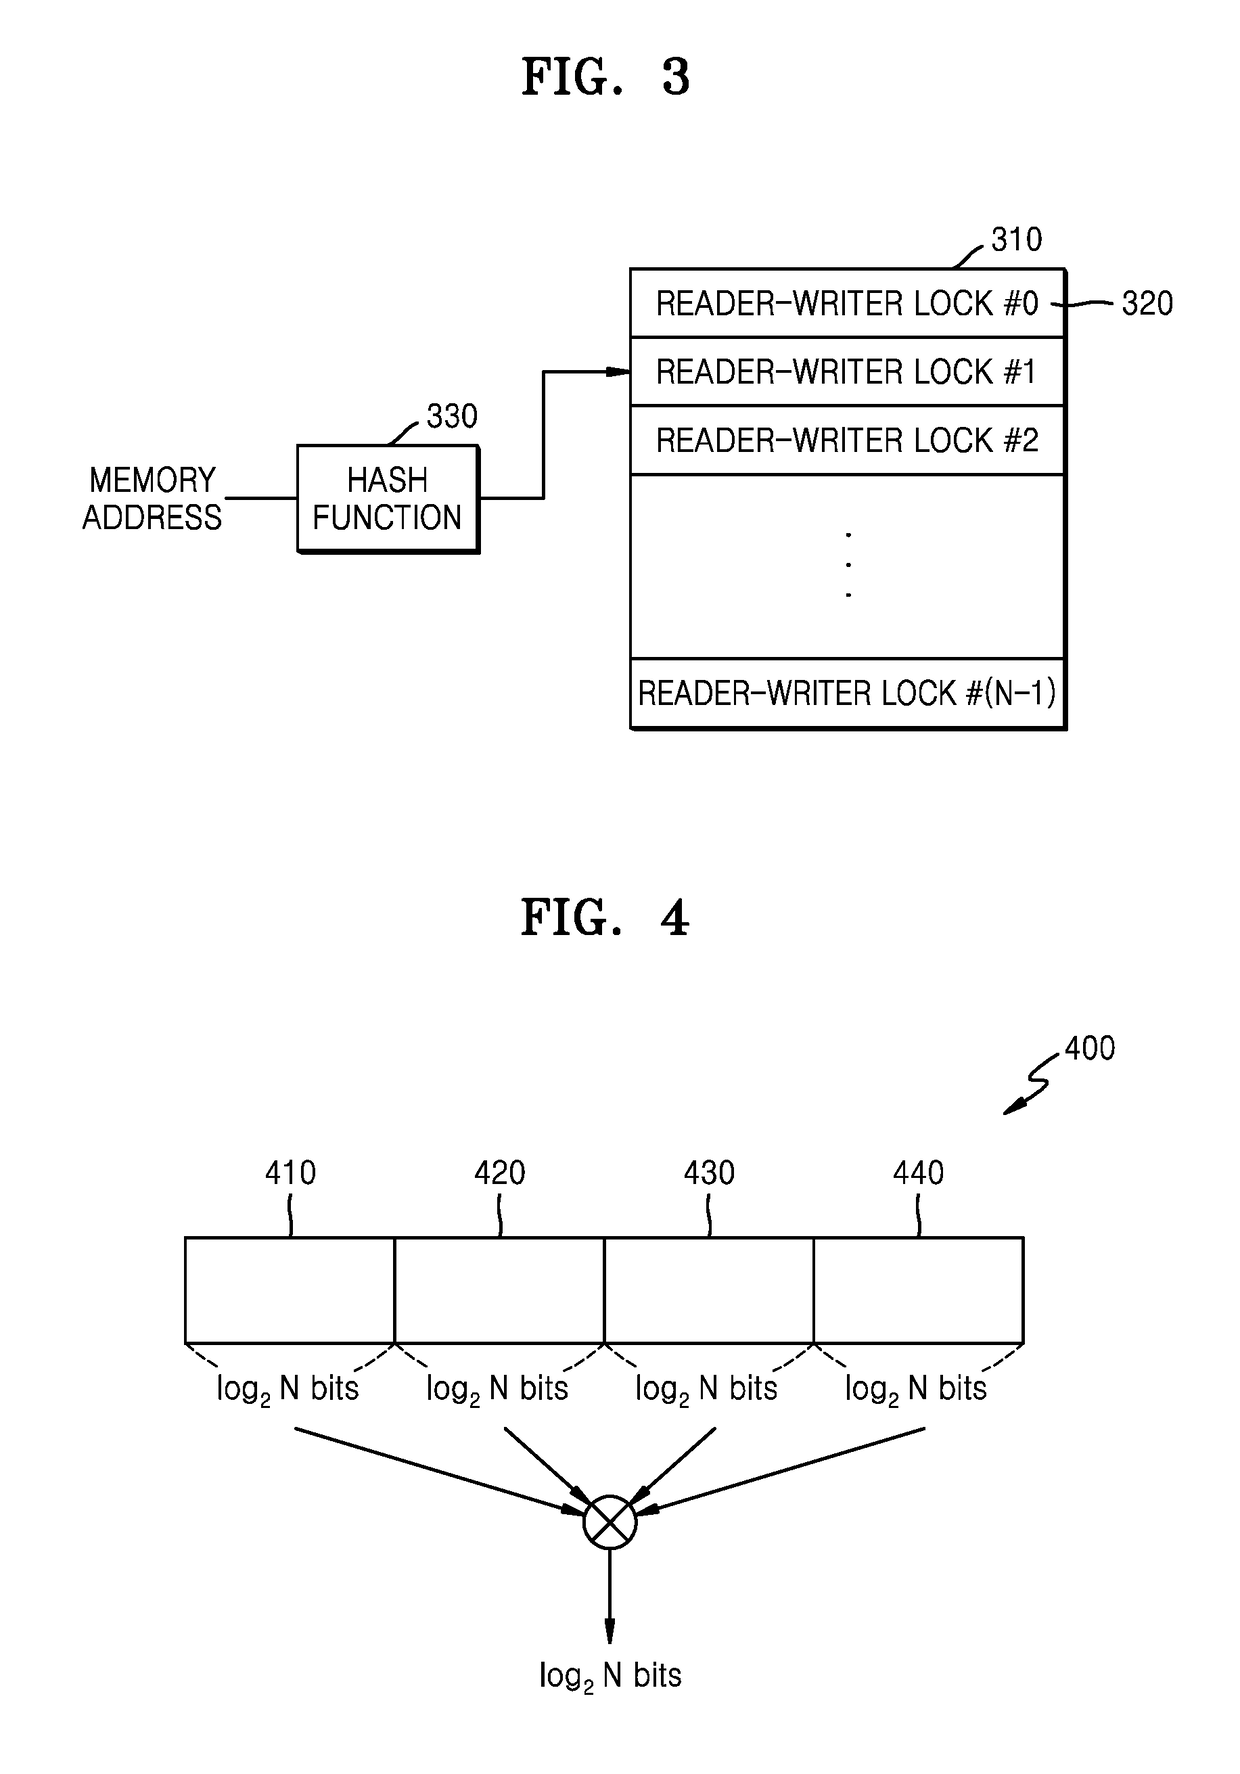 Method and apparatus for processing instructions using processing-in-memory